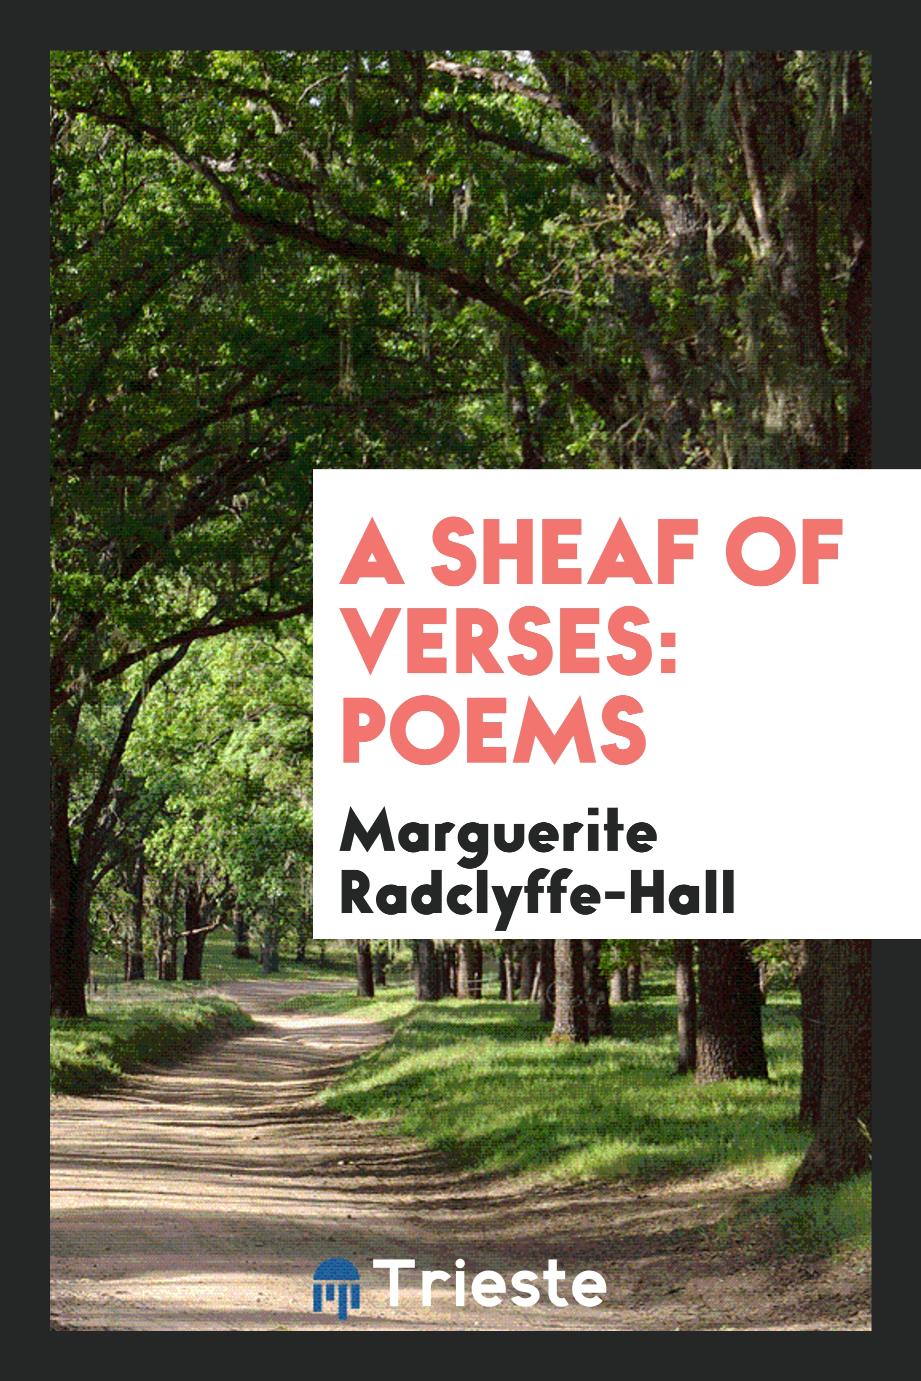 A sheaf of verses: poems